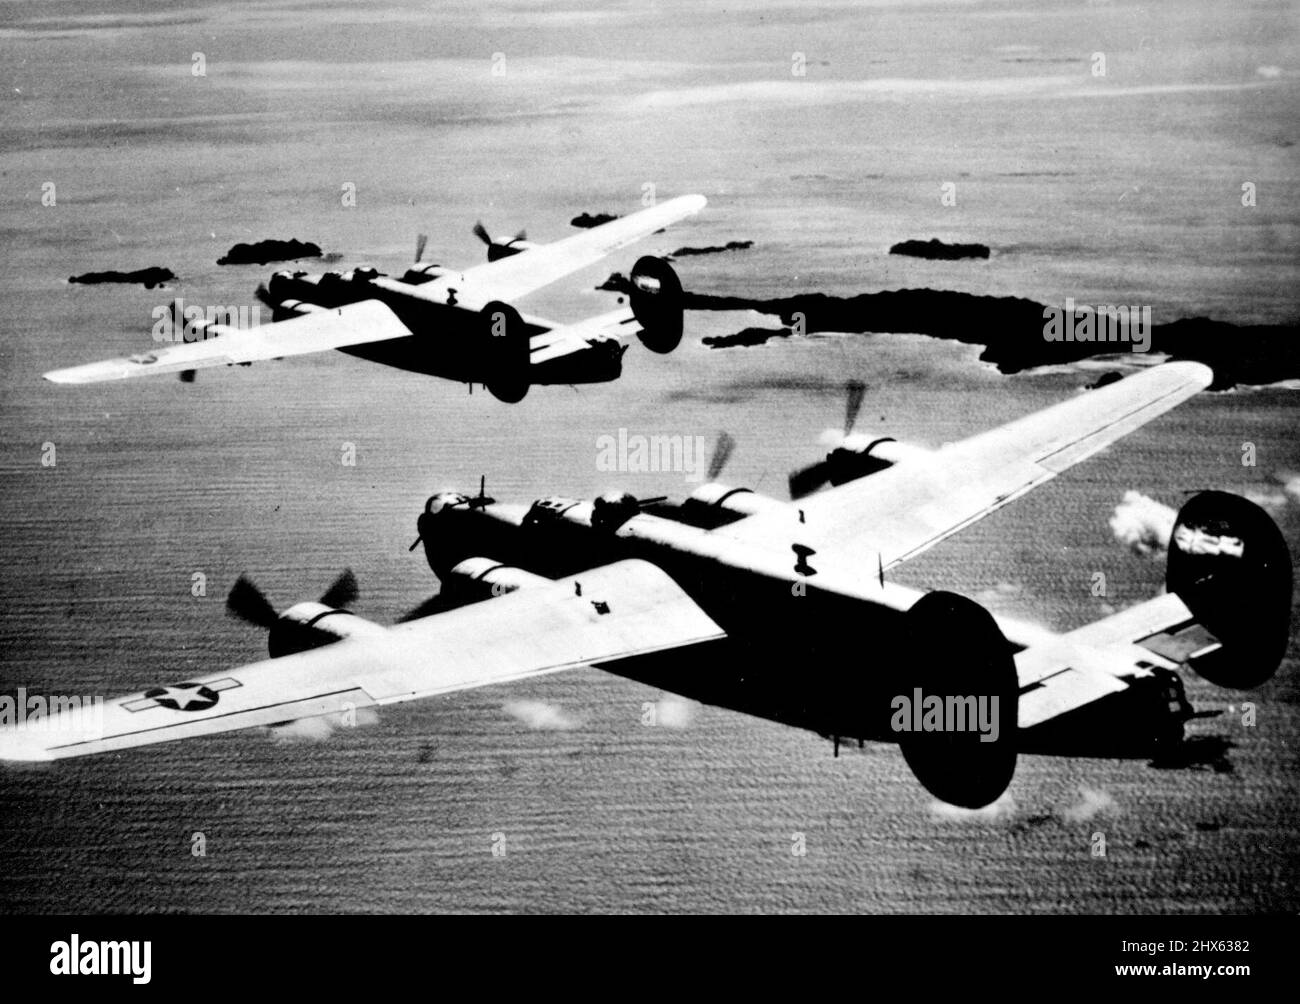 American Wings Over Haha Jima With the target area rising out Of the sea before them, two Liberator bombers of the Seventh U.S. Army Air Force spread their wings menacingly over Japanese-held Haha Jima in the Bonin Island. Operating from bases in the Marianas Islands, American planes have been regularly pounding Japanese installations in the Bonins and near-by Volcano Islands, both in the central Pacific, as the Allies move closer and closer to the Japanese homeland. January 19, 1945. (Photo by Stock Photo